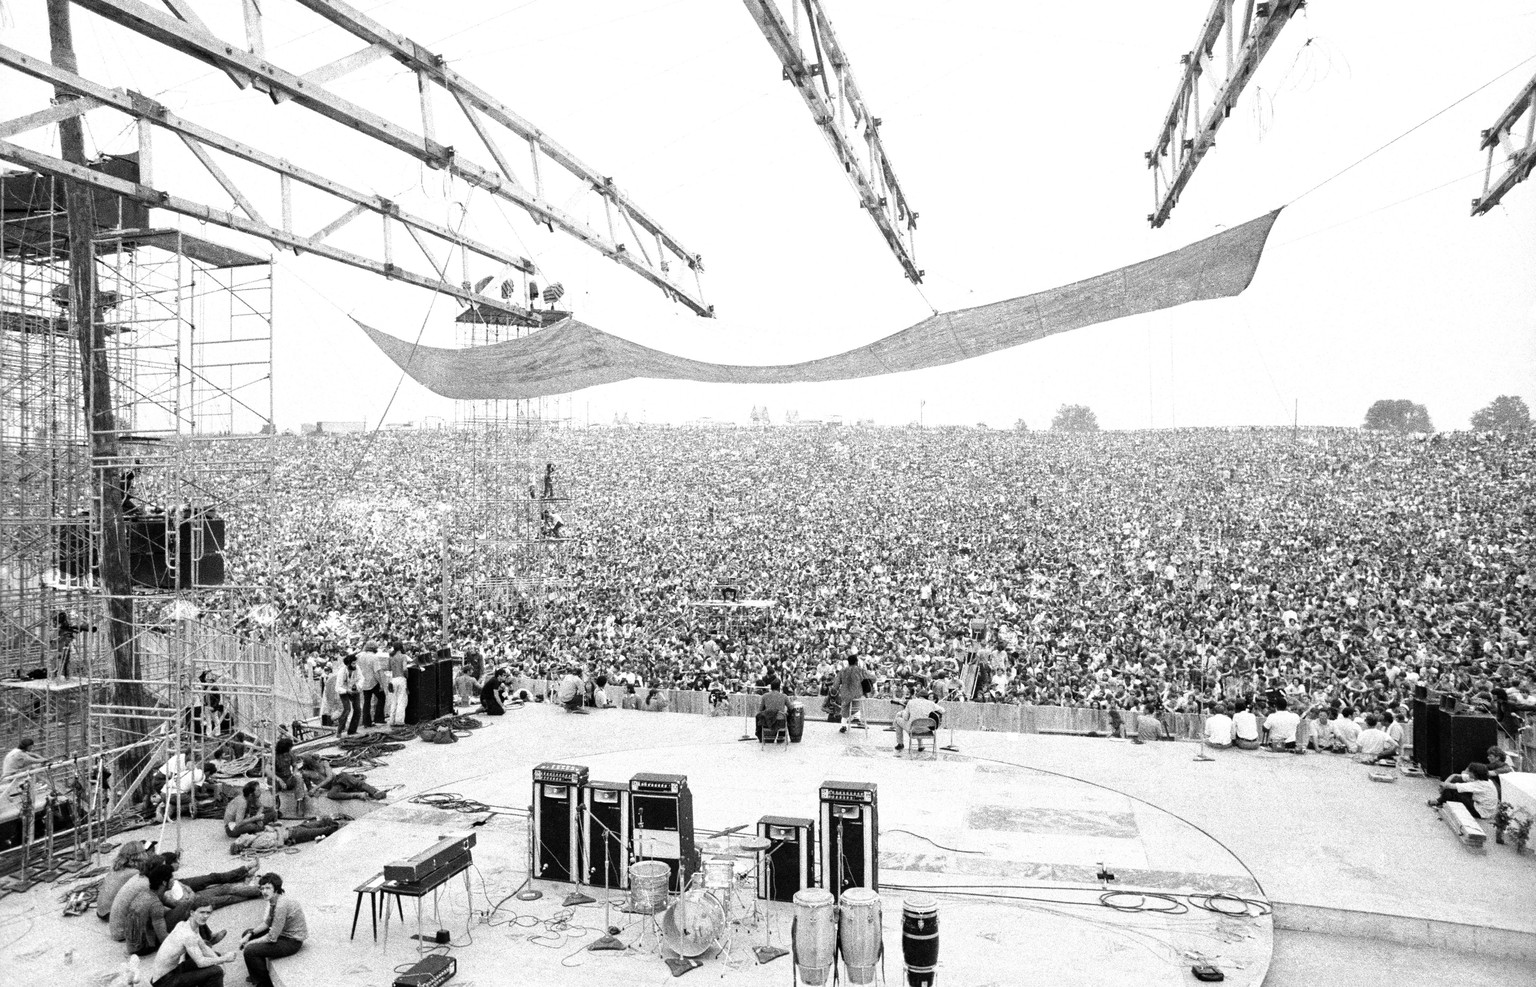 UNITED STATES - AUGUST 15: Three days of peace love and music, better known as Woodstock. The crowd assembles for the 4pm session starring Richie Havens, just a part of the 250,000 who made the scene. ...